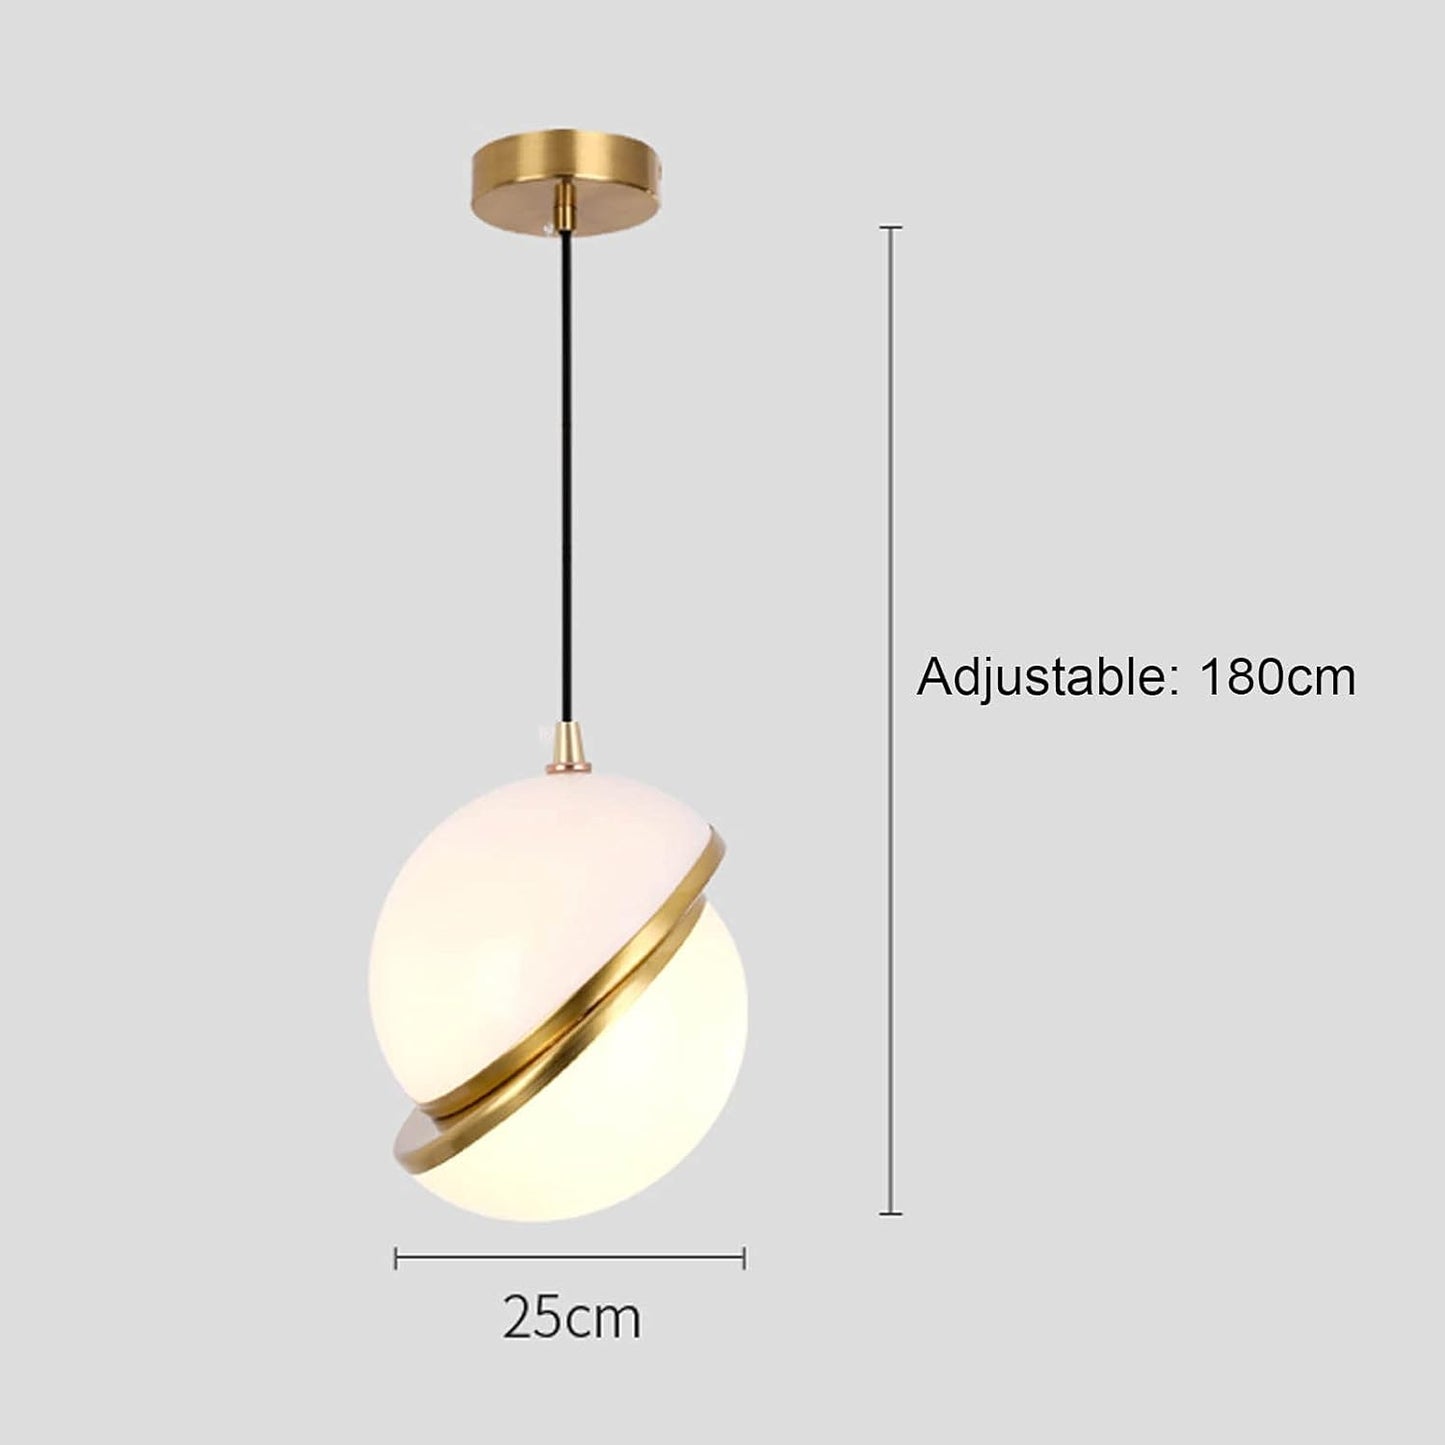 AHUJA INTERNATIONAL Pendant Light Fixtures,Ball Glass Lamp Shade Nordic Style Chandelier,Round Gold Brushed Metal Iron Ceiling Hanging Light with Adjustable Wire